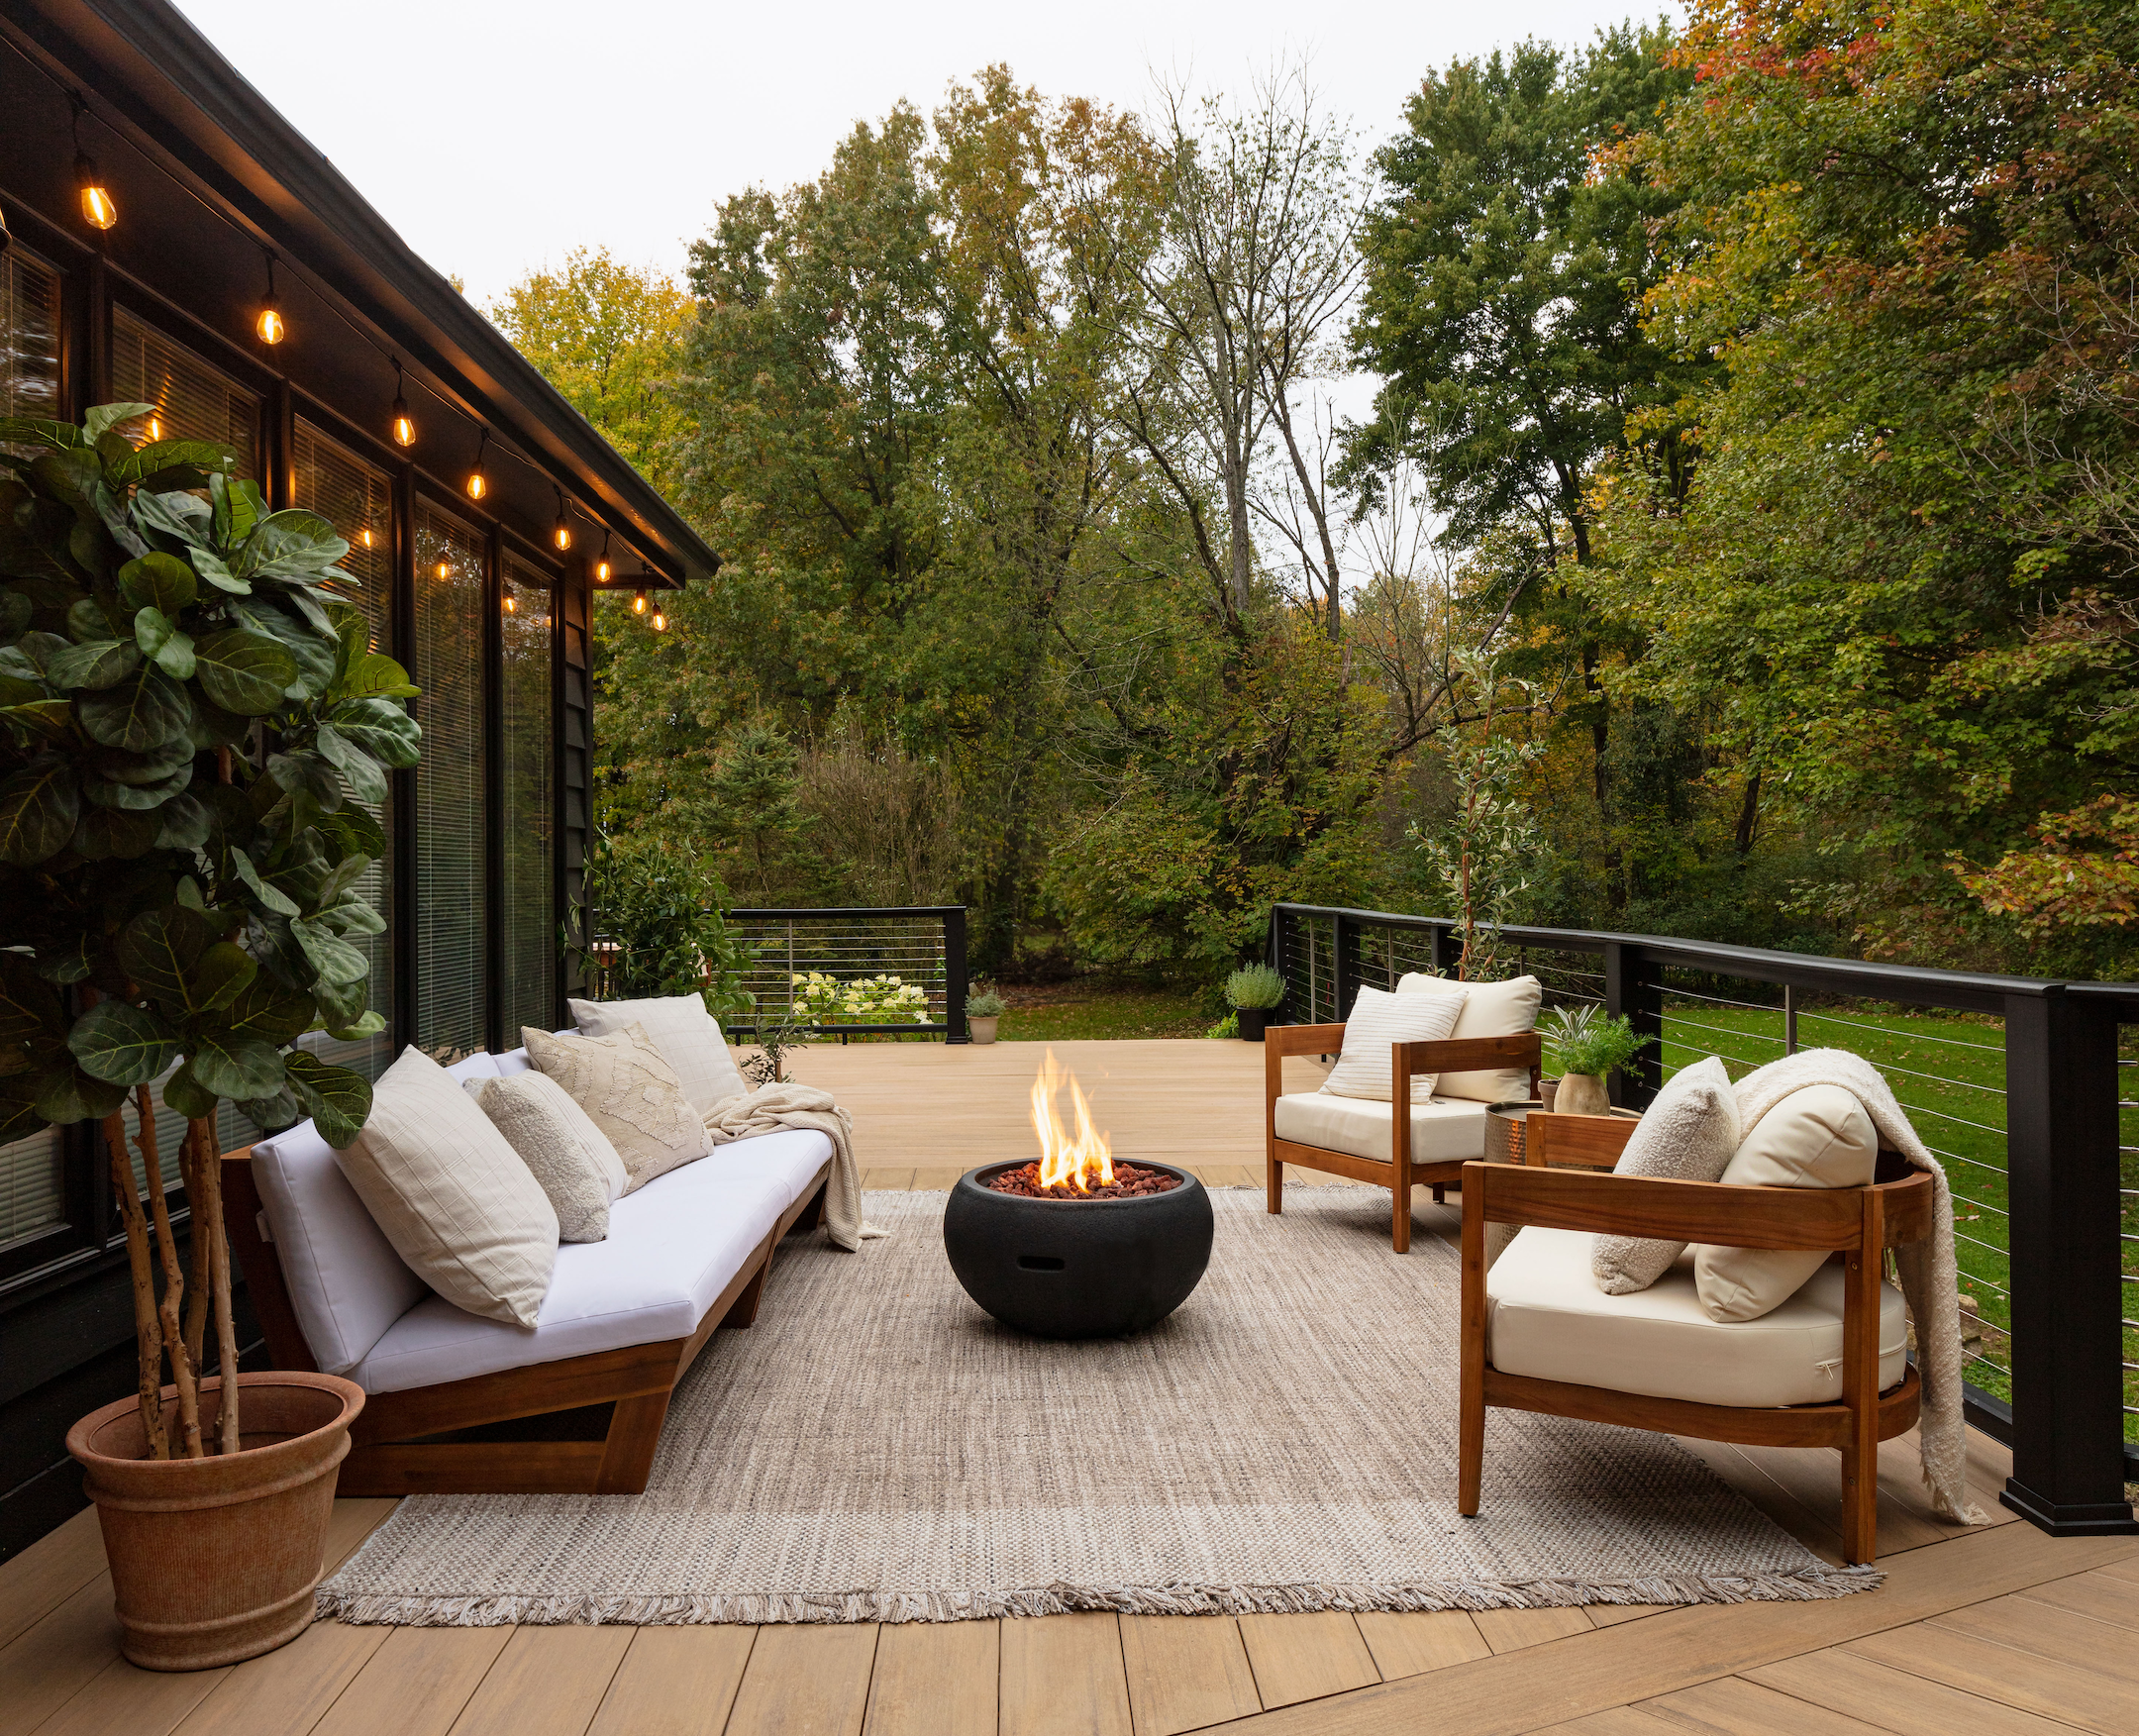 A backyard with TimberTech composite decking, fire pit with lounge couches next to tall trees